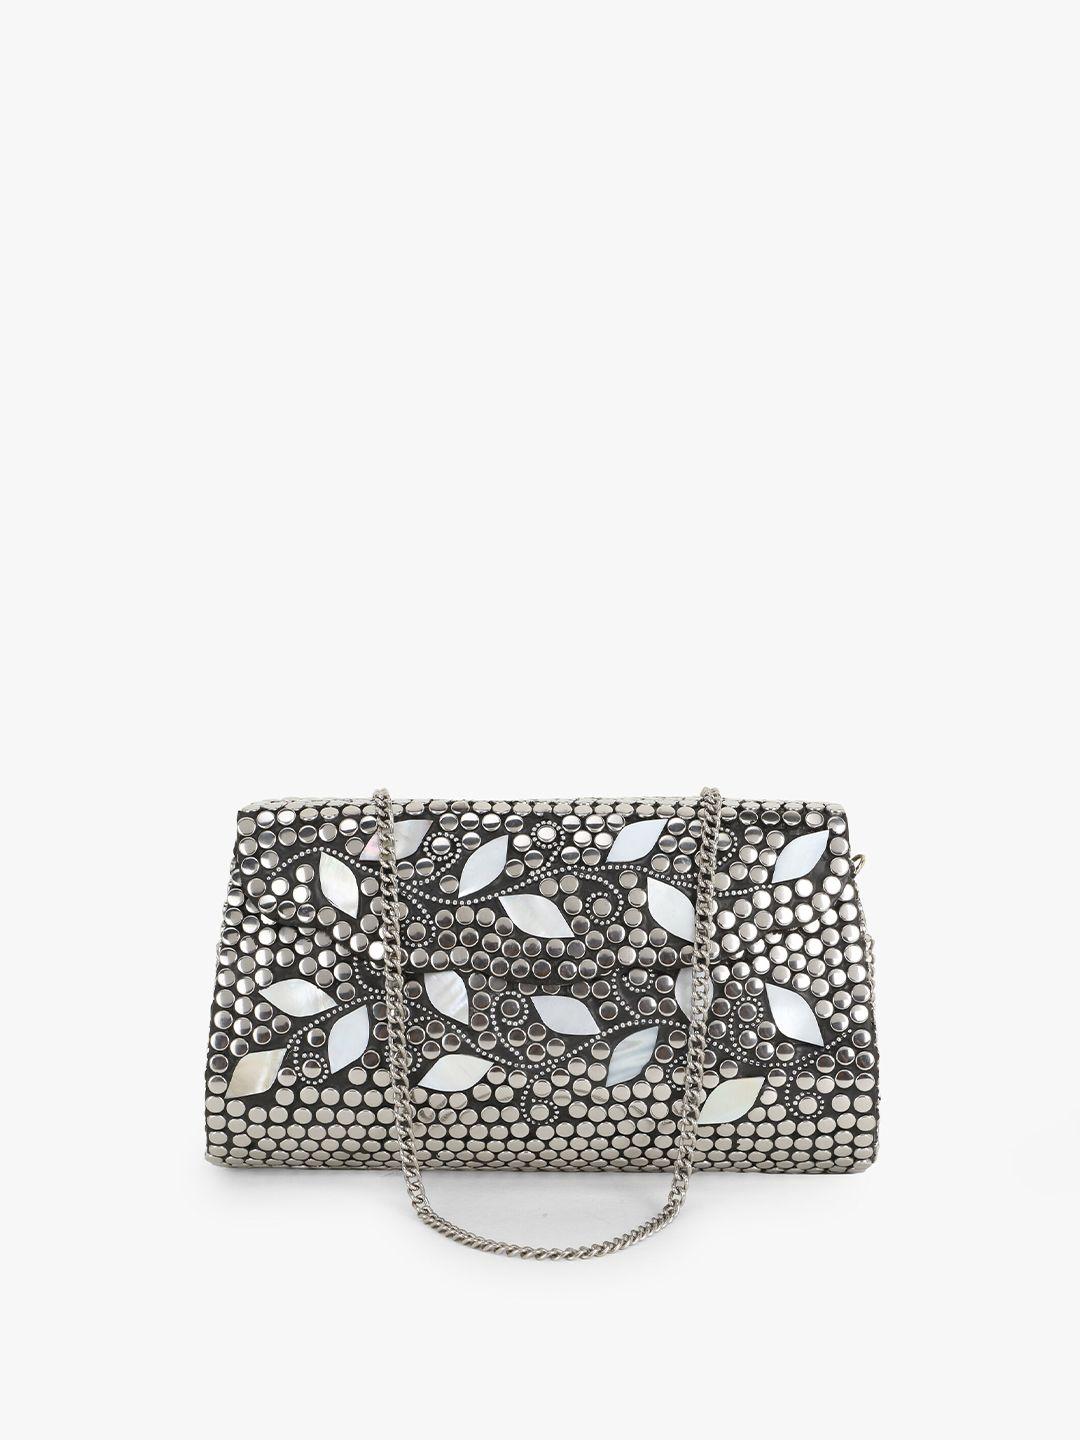 anekaant-silver-toned-embellished-purse-clutch